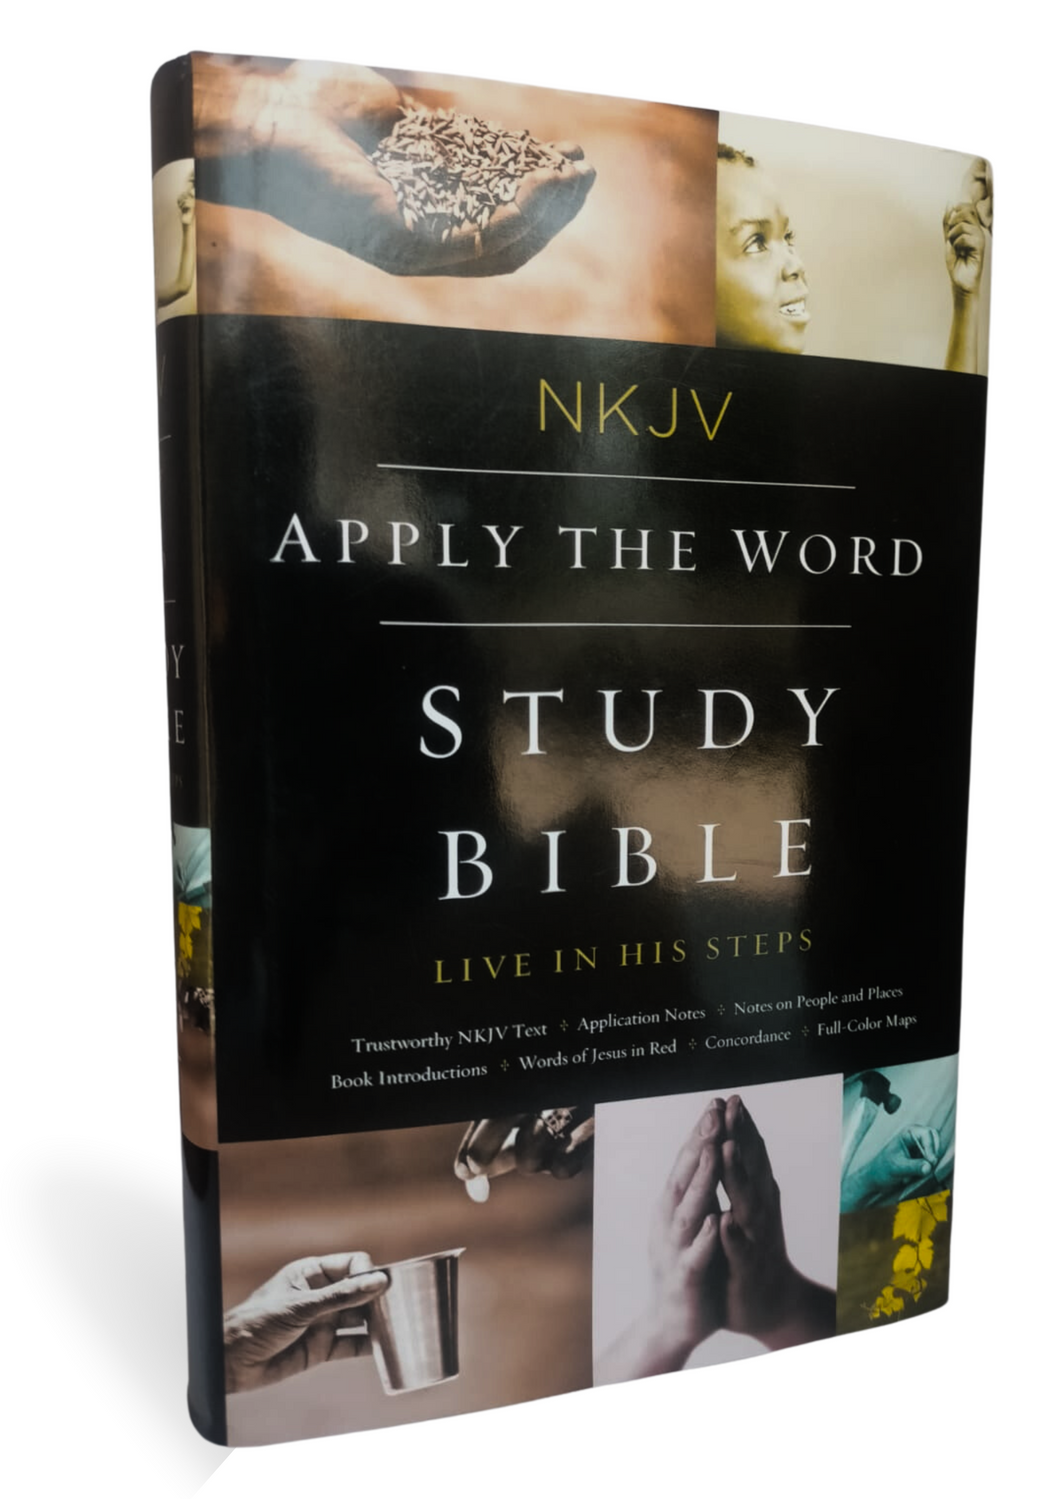 NKJV, Apply the Word Study Bible, Hardcover: Live in His Steps.